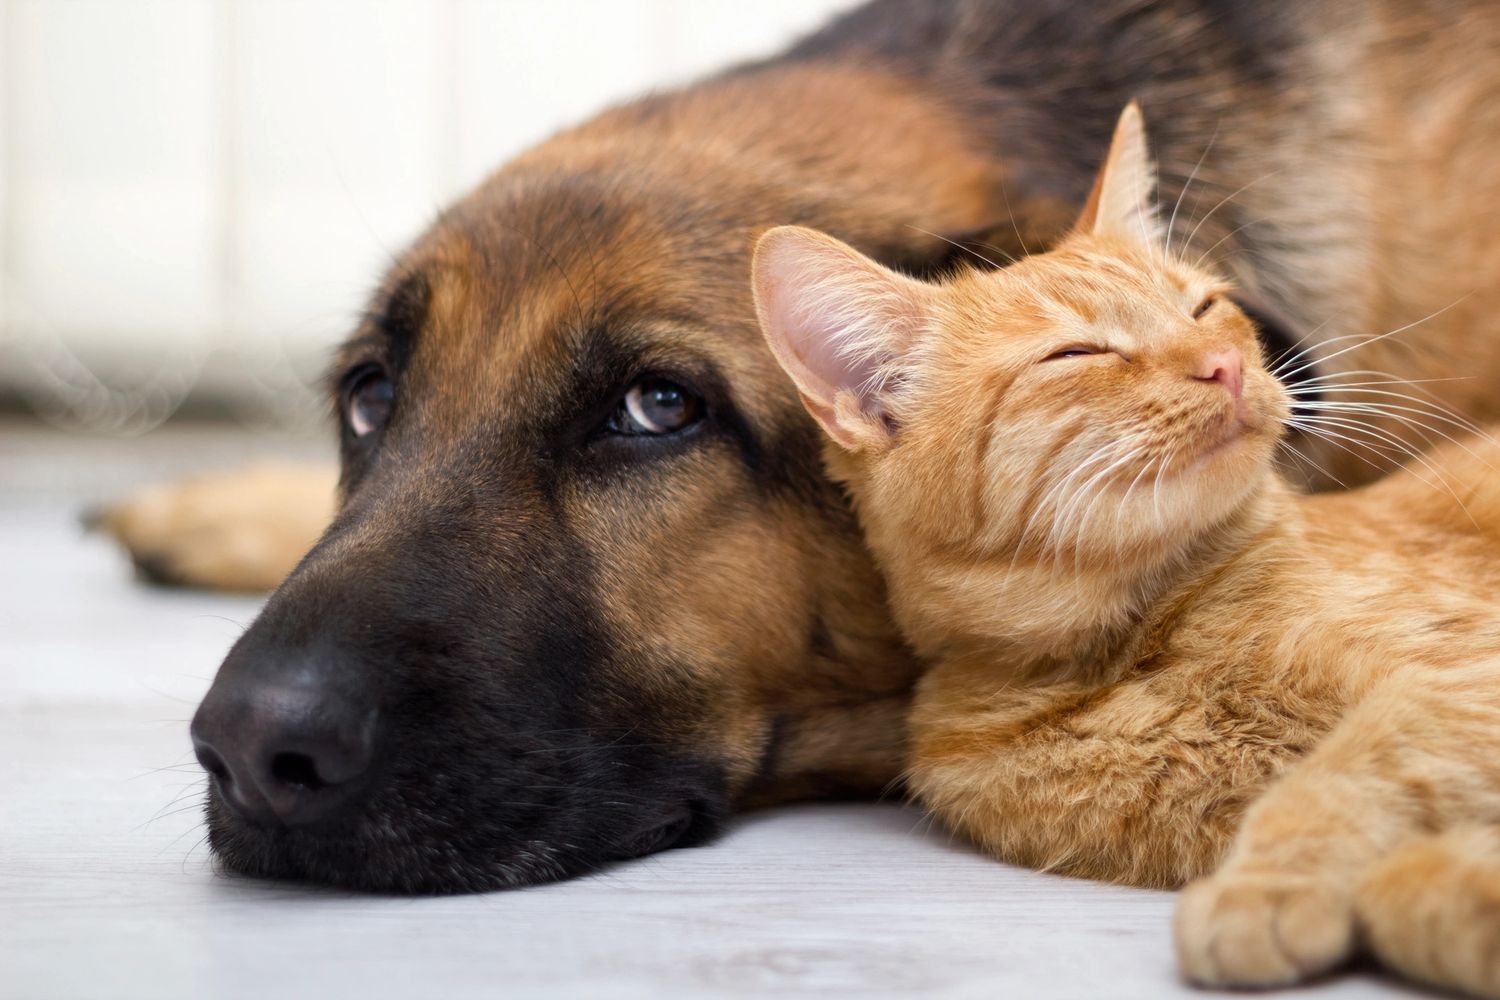 Pet Supplies - Dog and Cat - CBD Products